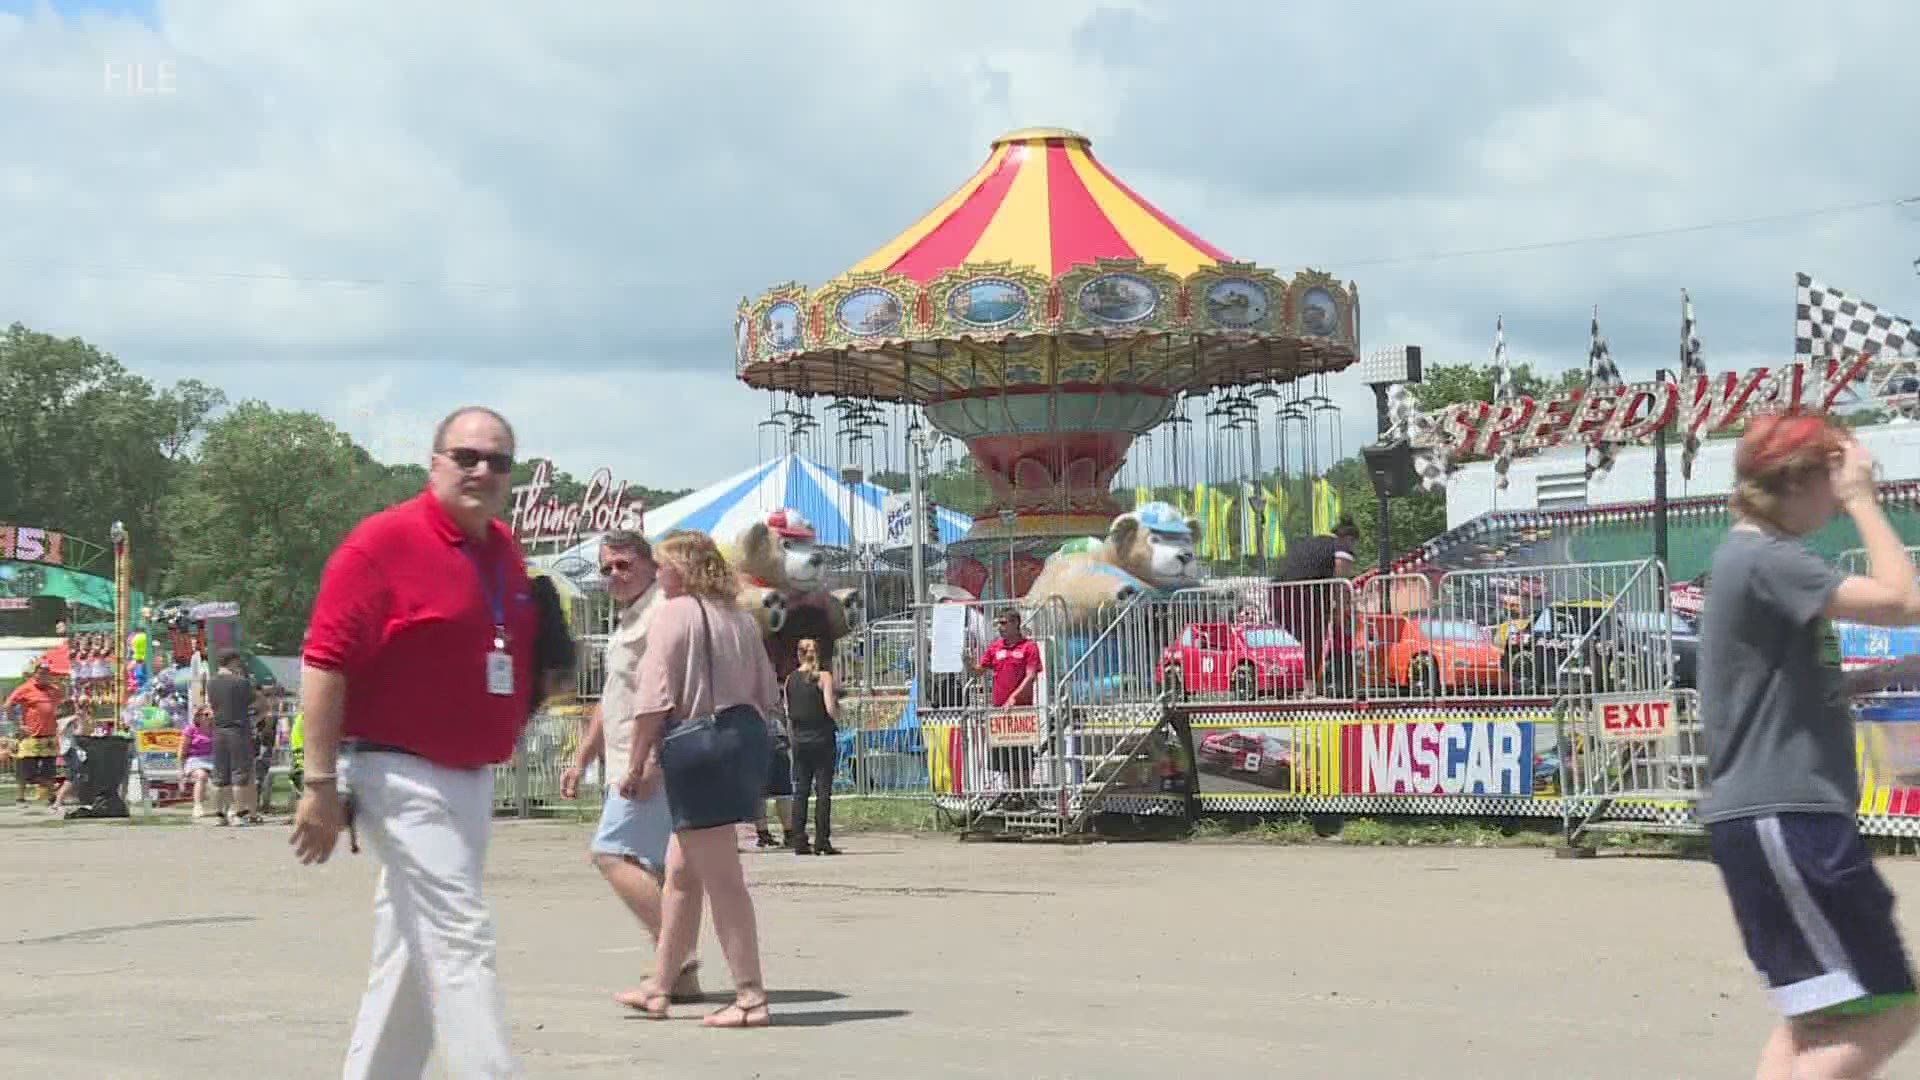 The Ionia Free Fair board of directors voted on the decision to cancel the fair this week.